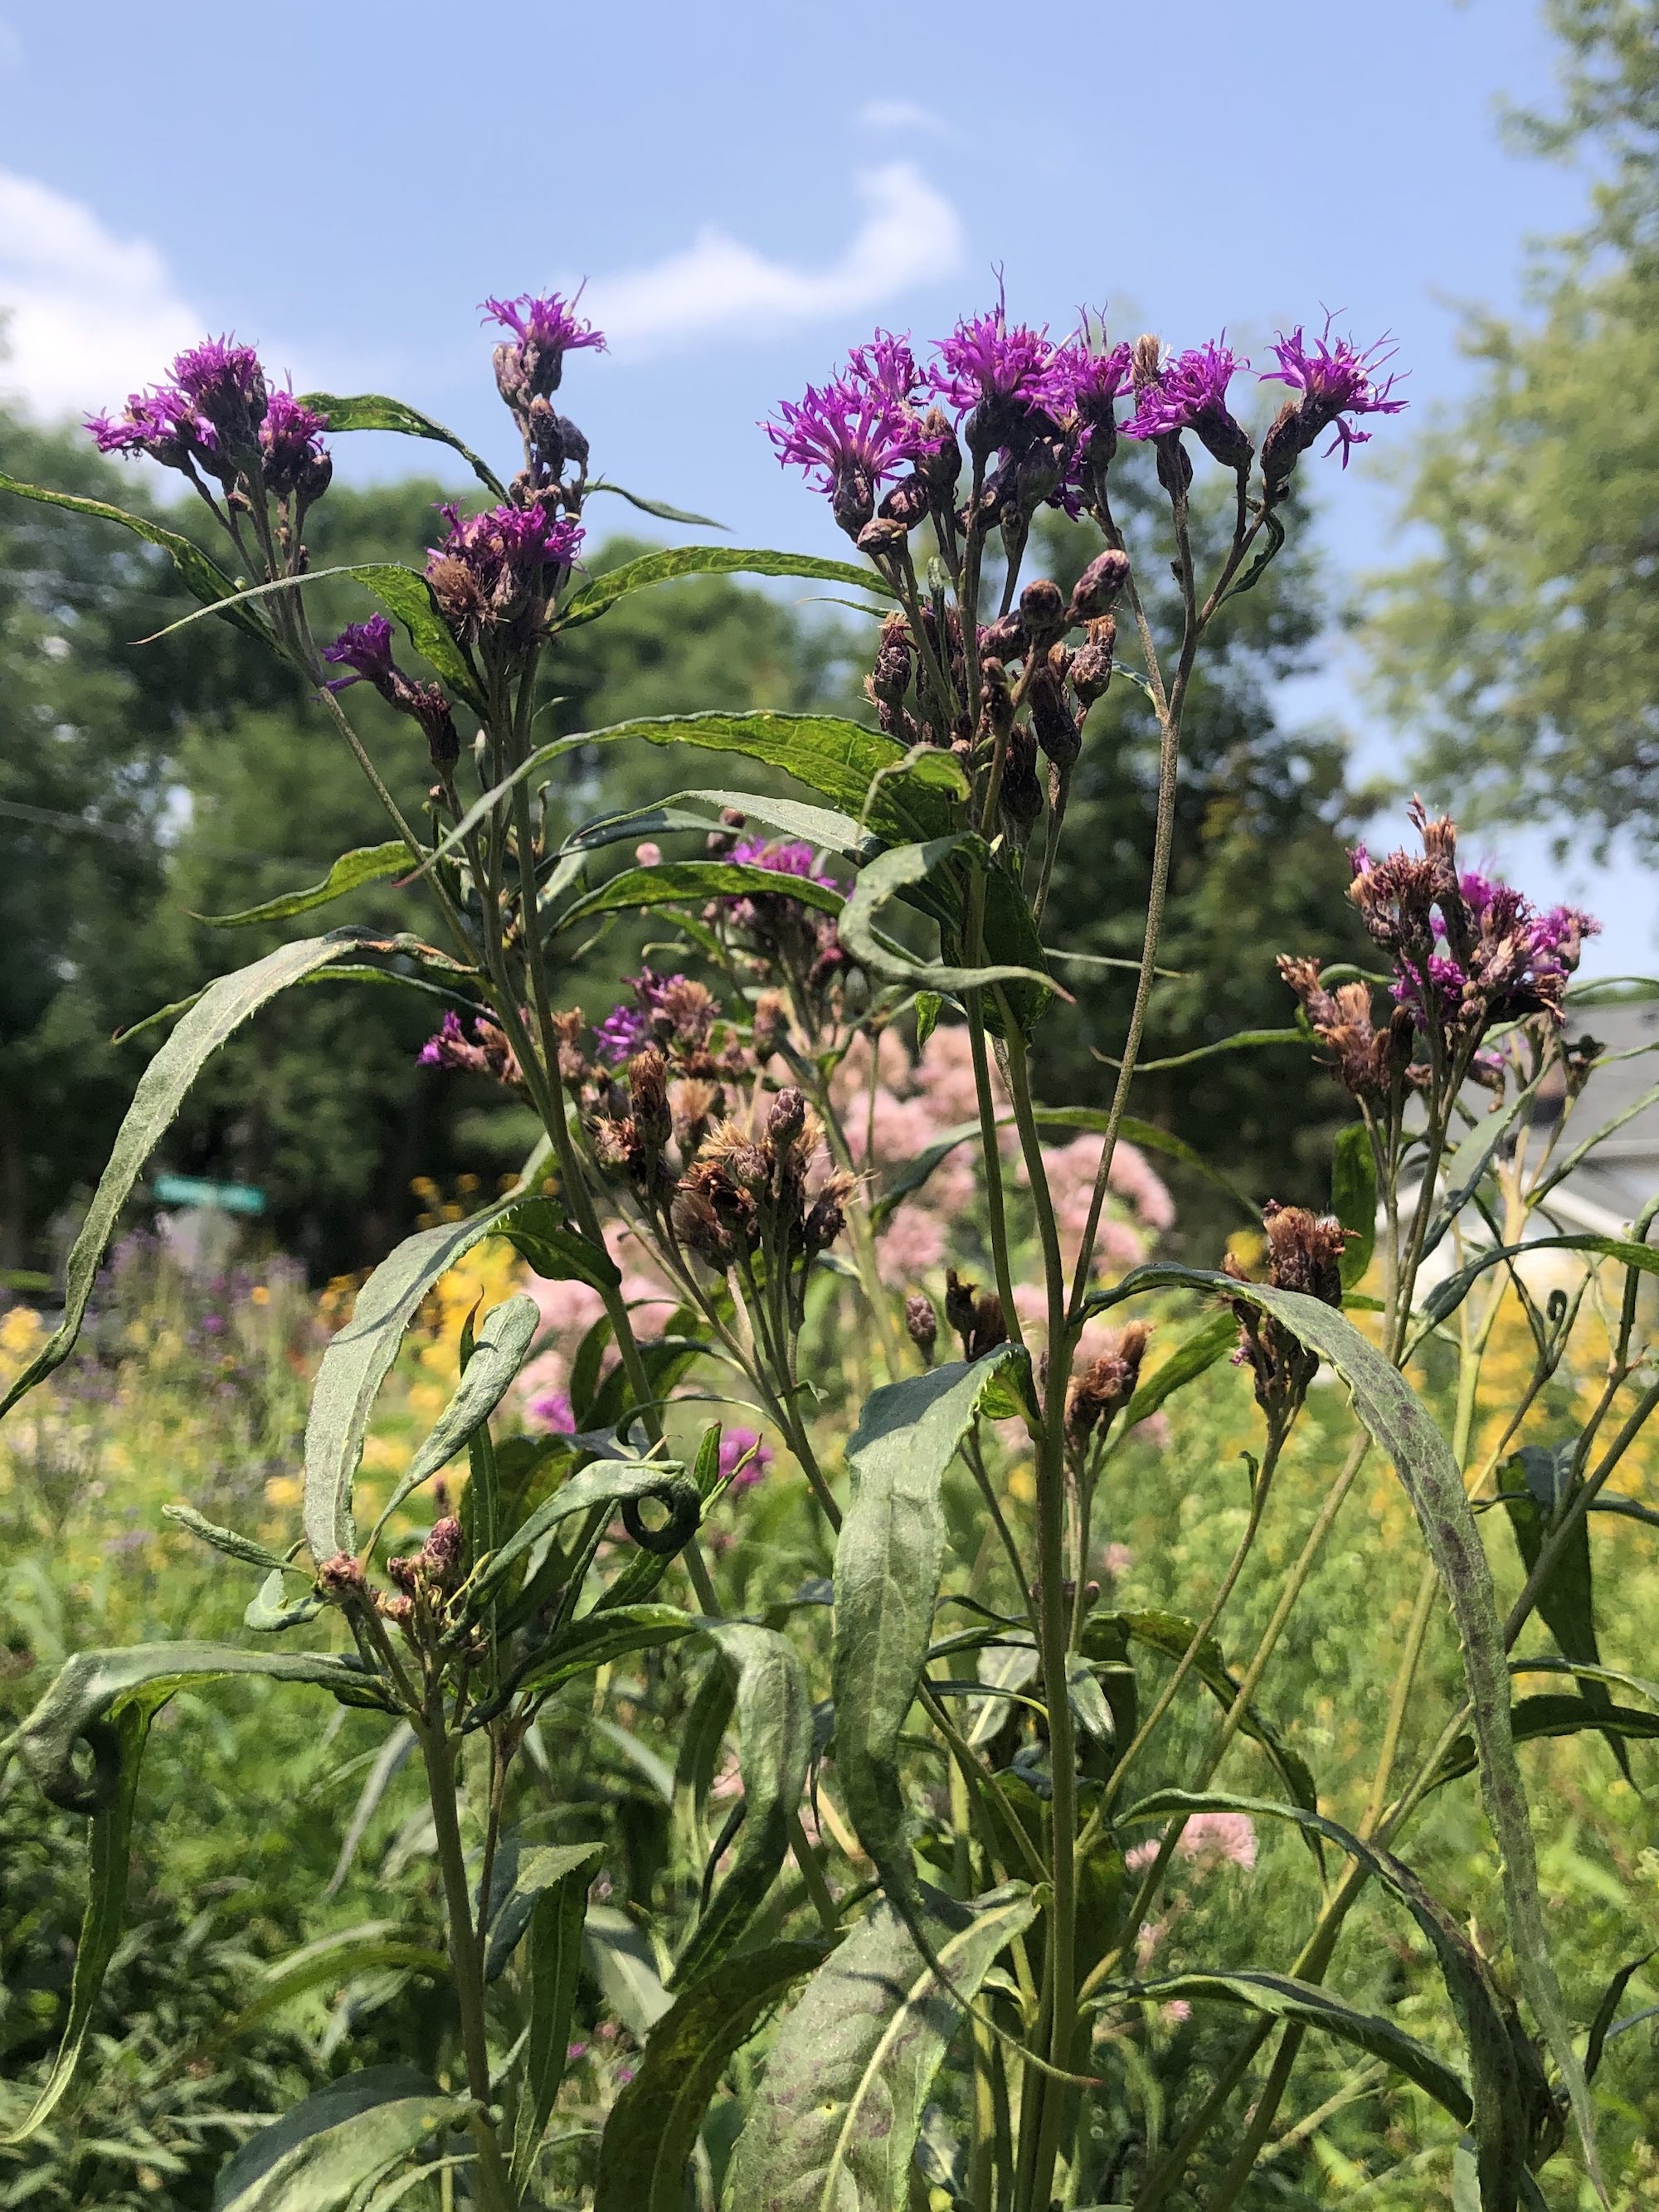 Common Ironweed along bikepath behind Gregory Streetnear Commonwealth Avenue in Madison, Wisconsin on August3, 2021.